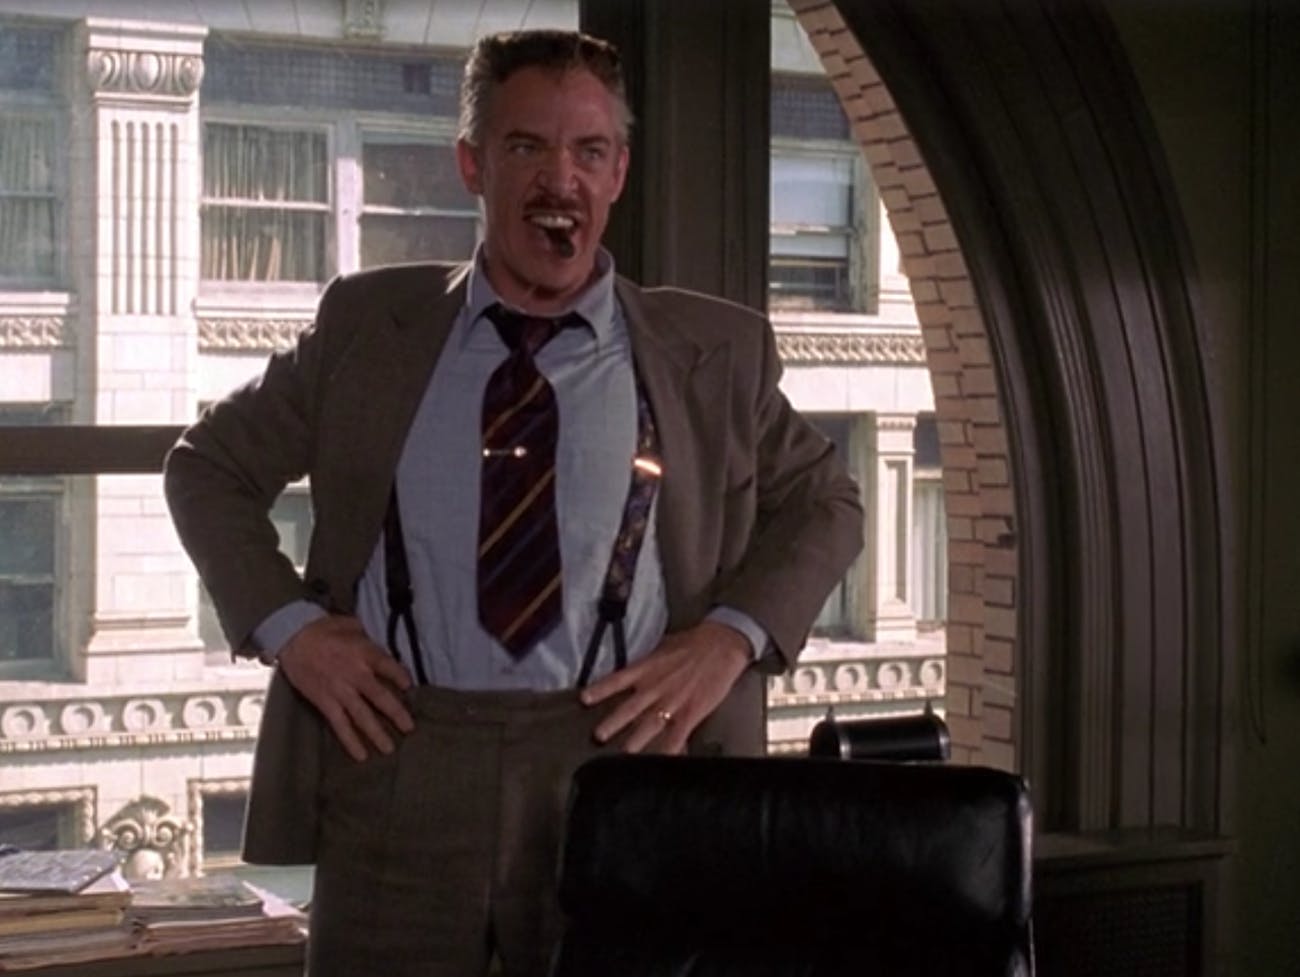 if-he-doesnt-want-to-be-famous-ill-make-him-infamous-jk-simmons-as-j-jonah-jameson-in-2002.jpg